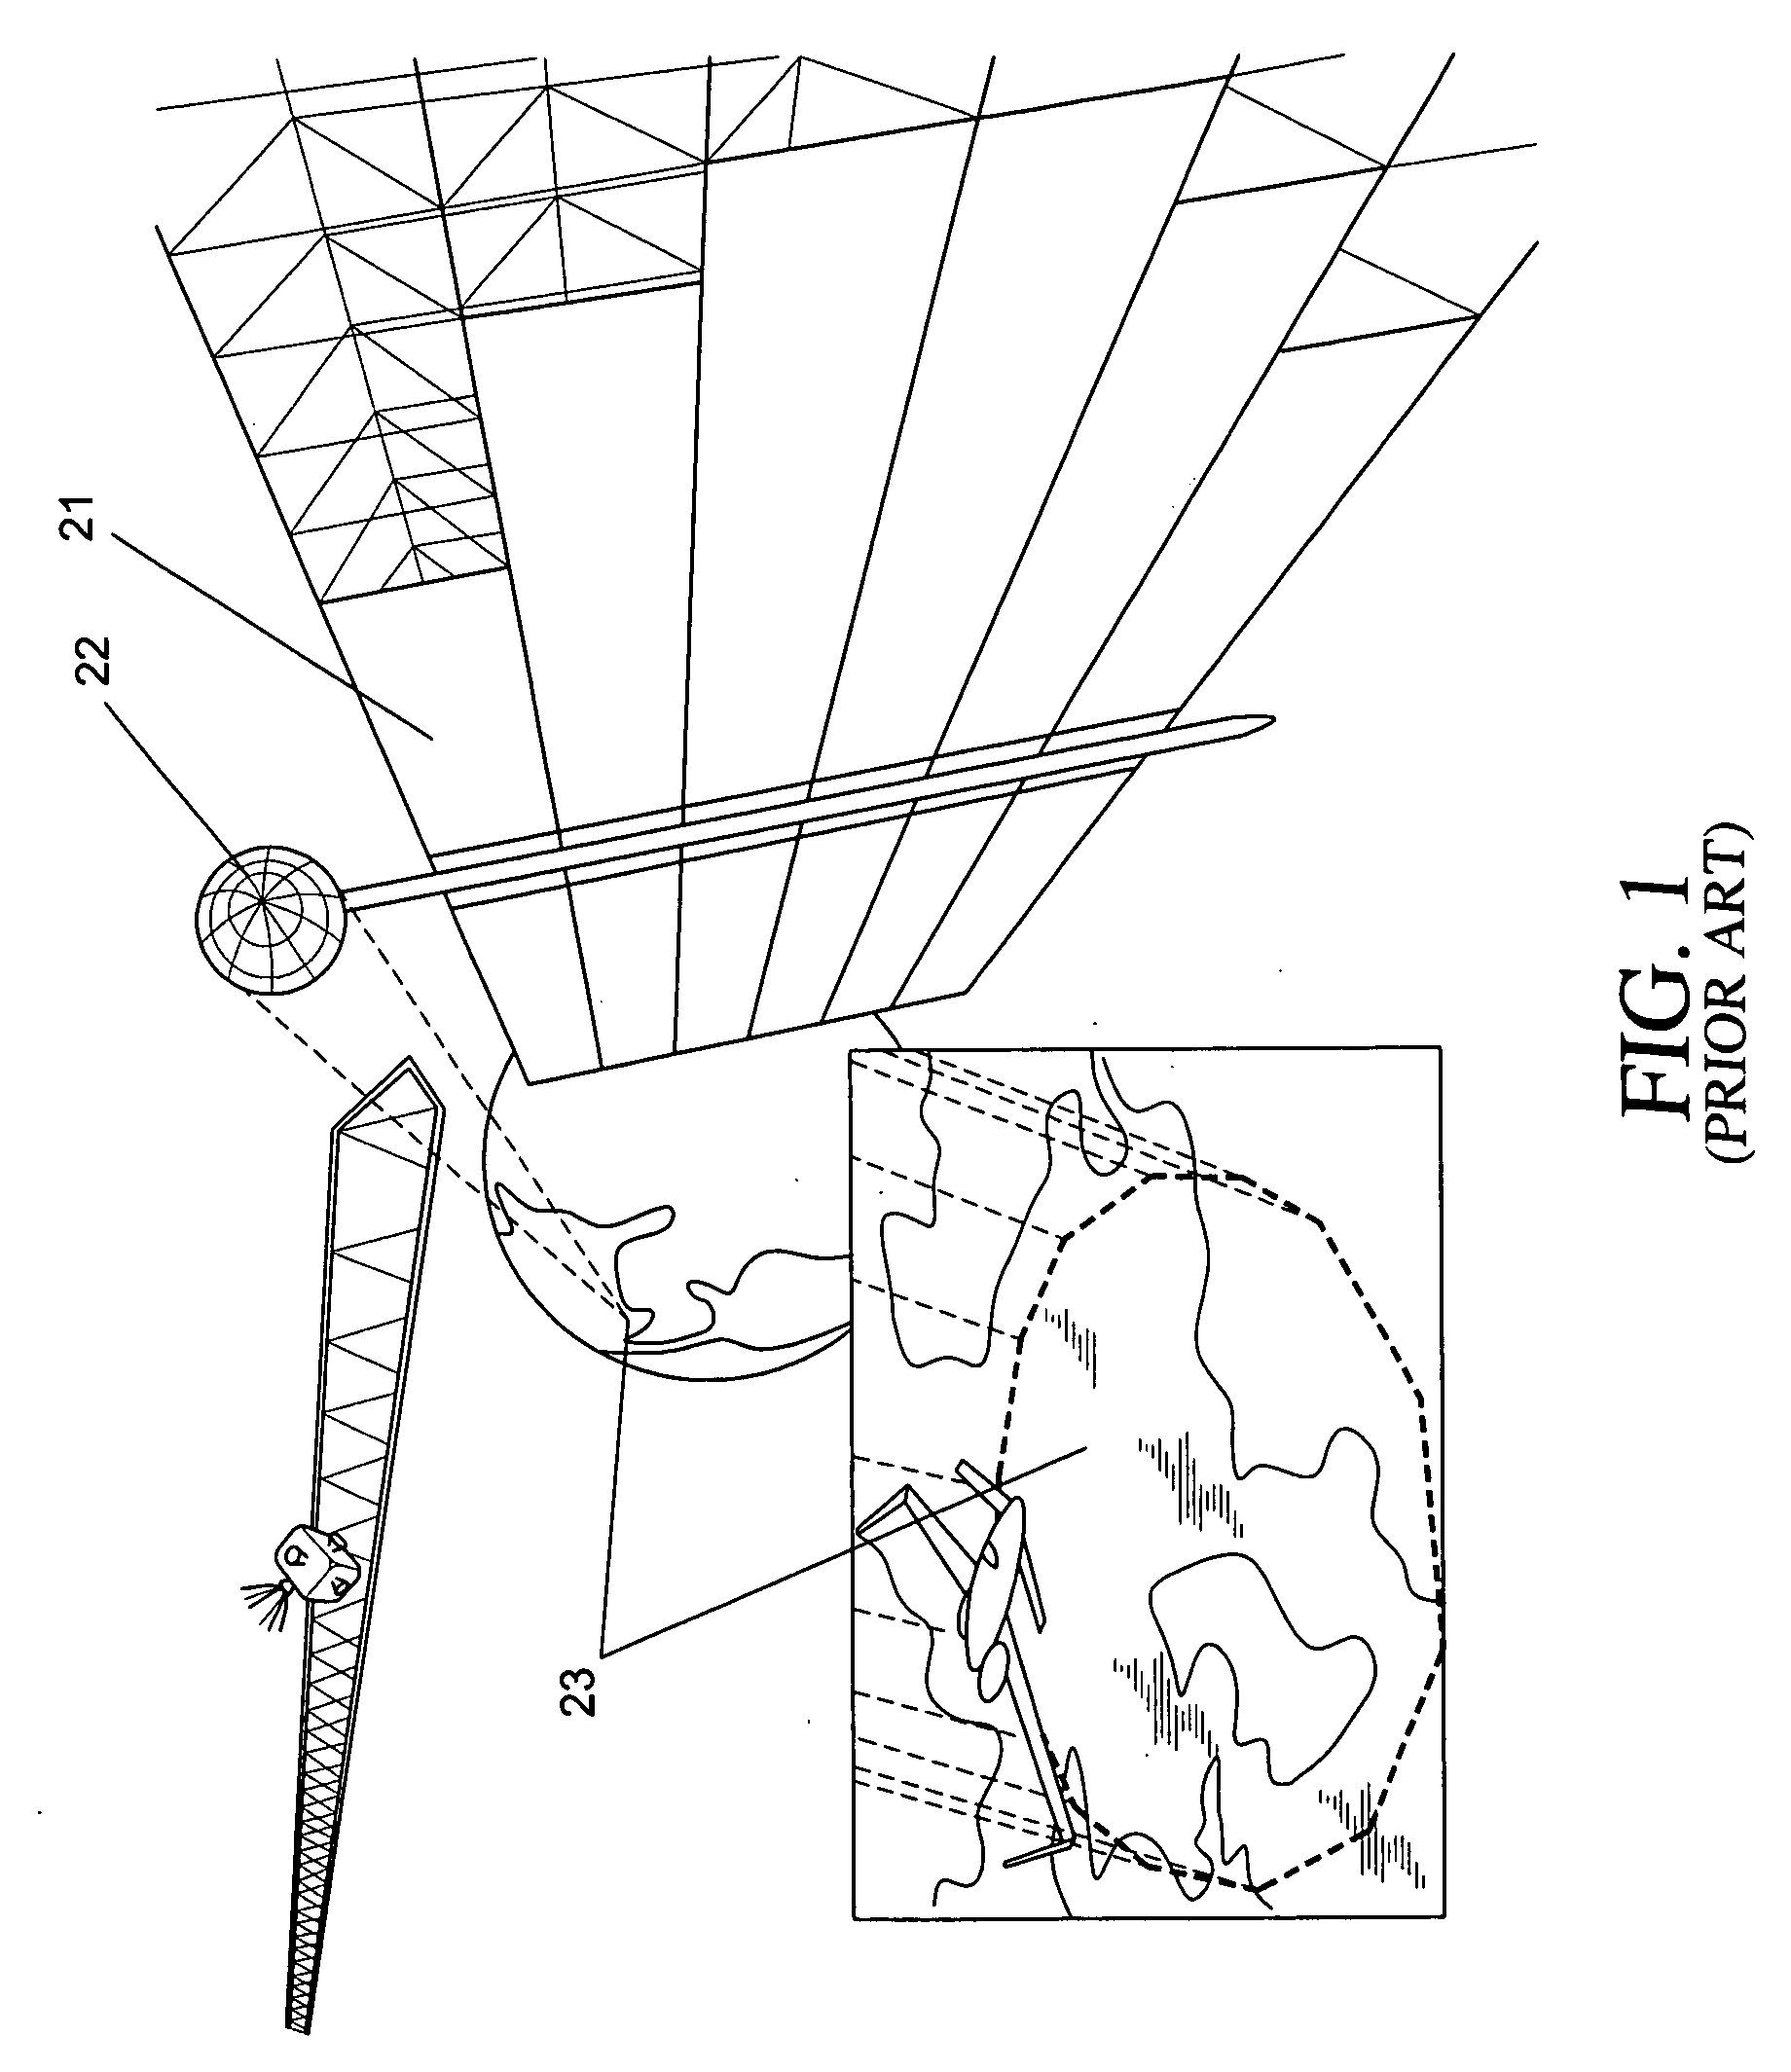 Method for manufacturing a solar module in orbit